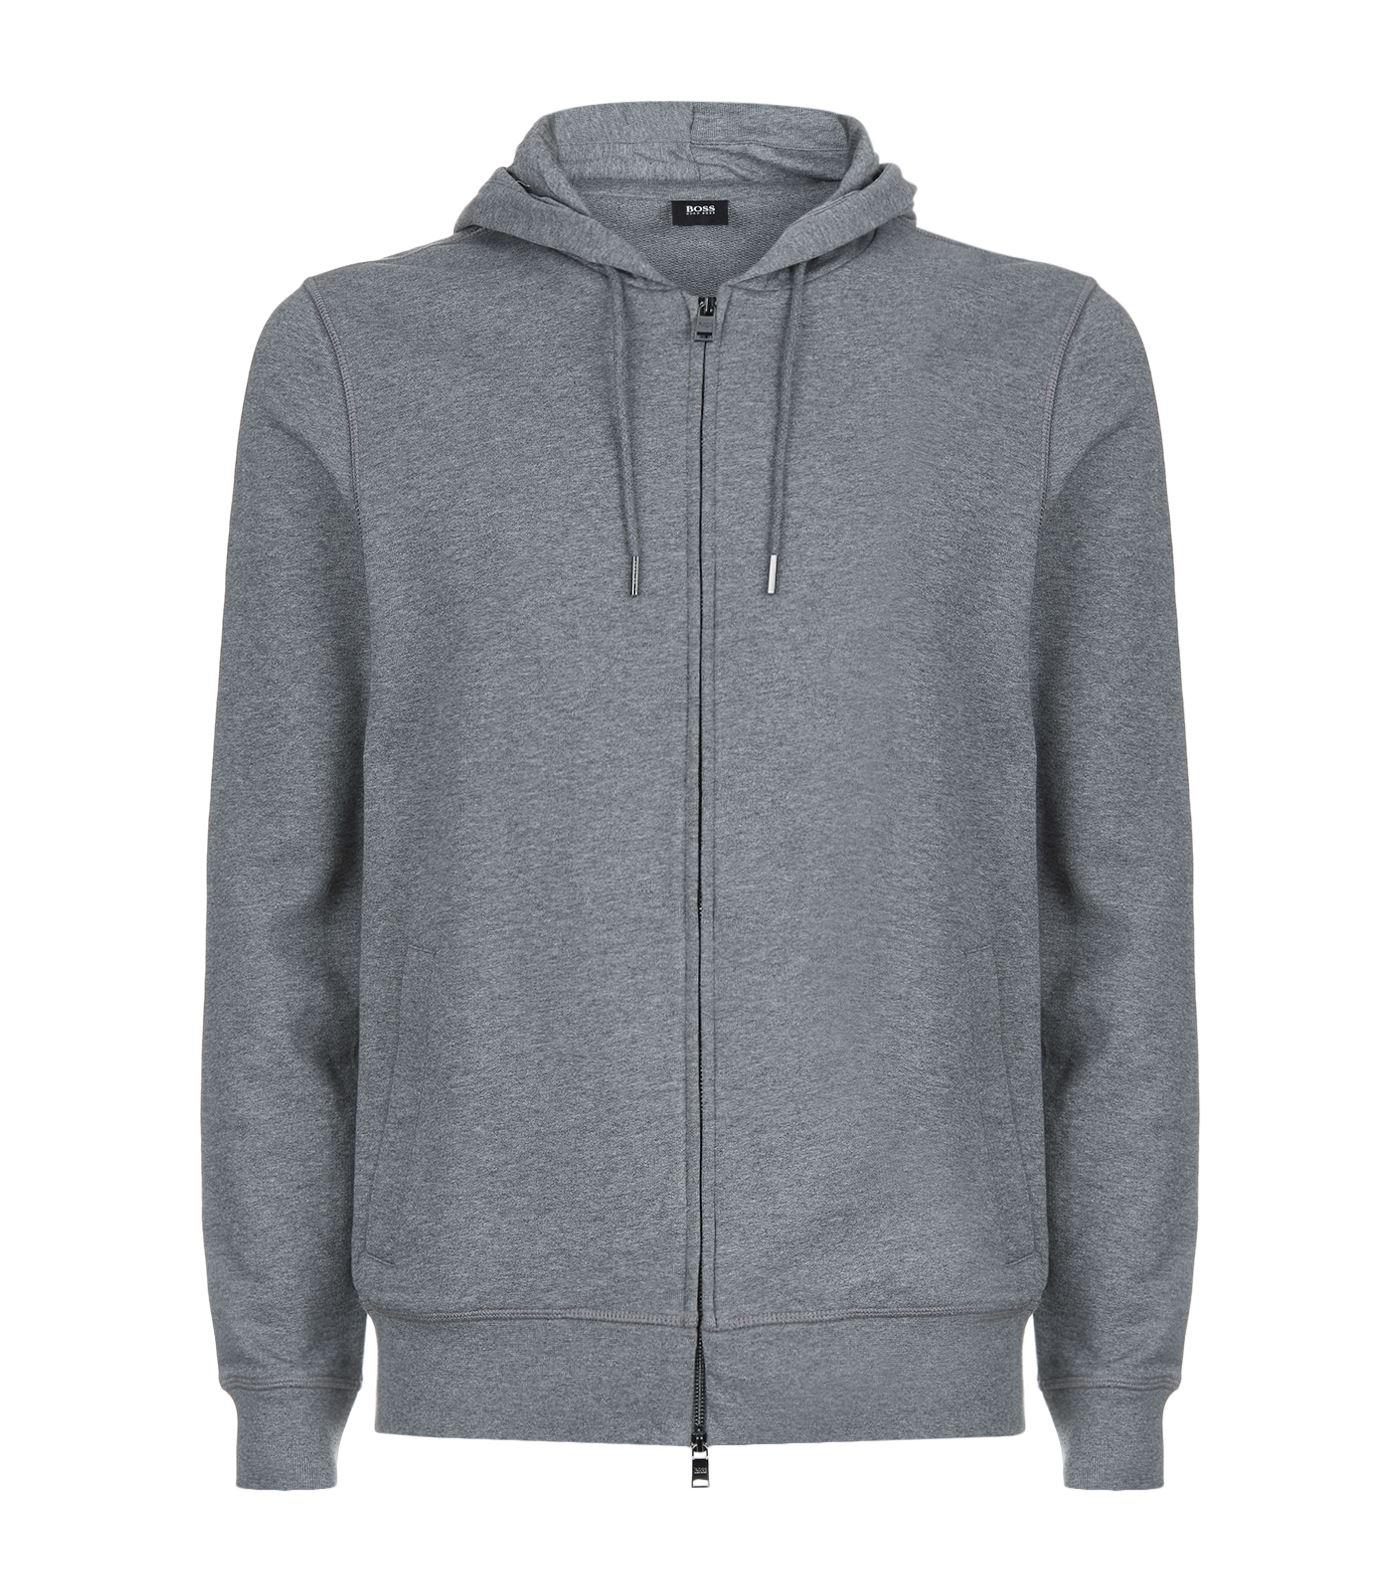 BOSS Cotton Seaton Slim-fit Hoodie in Grey (Gray) for Men - Lyst